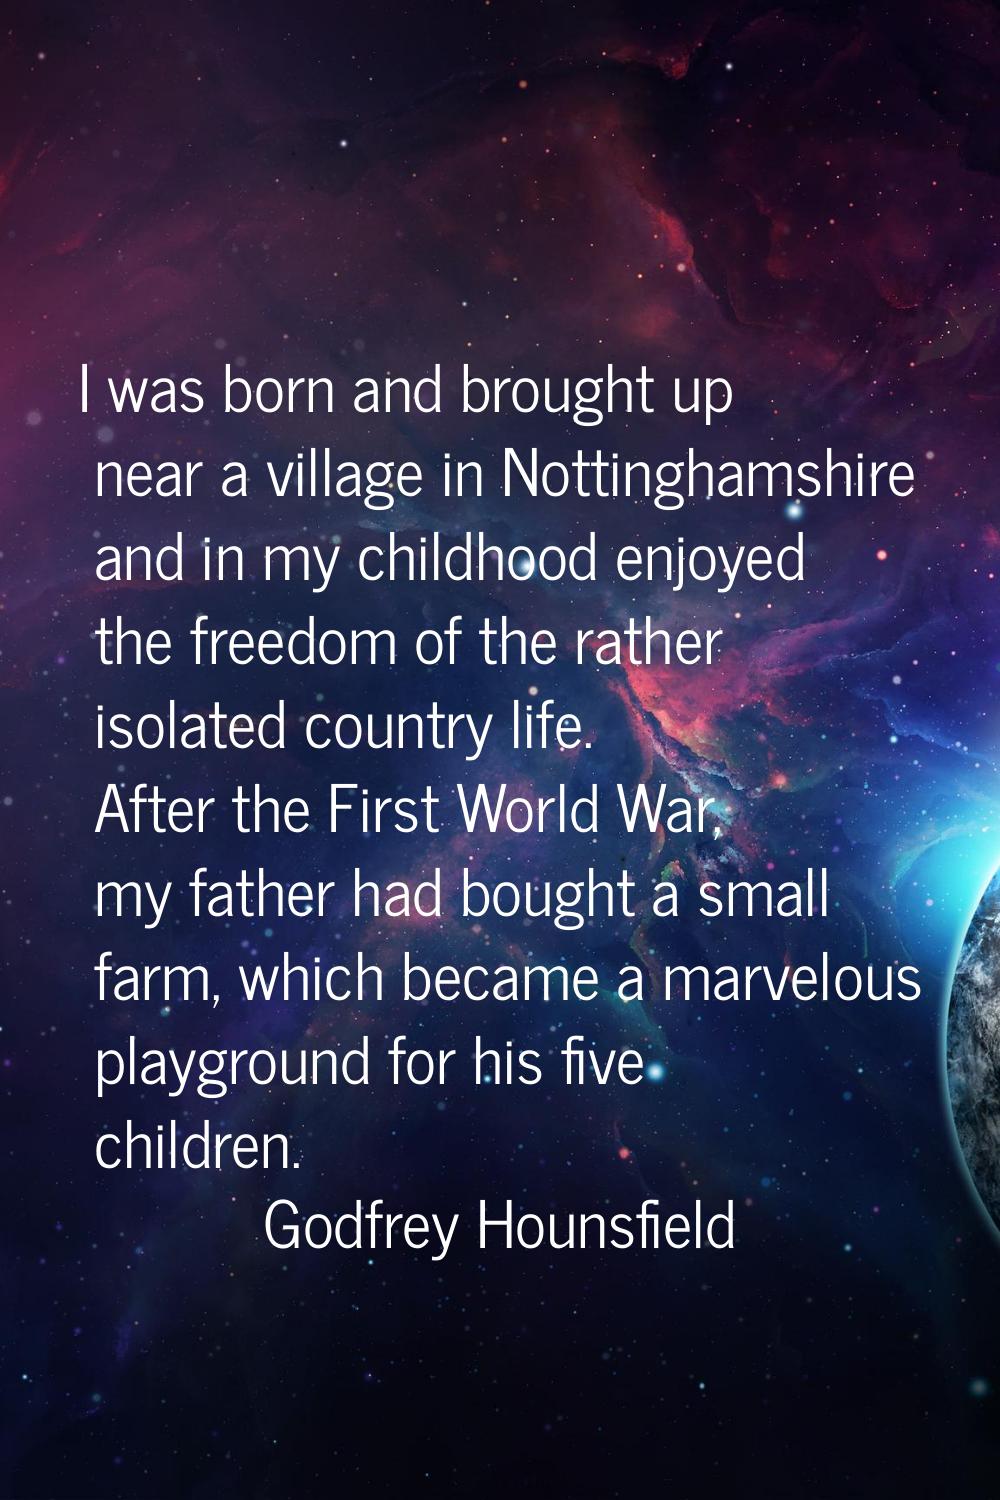 I was born and brought up near a village in Nottinghamshire and in my childhood enjoyed the freedom